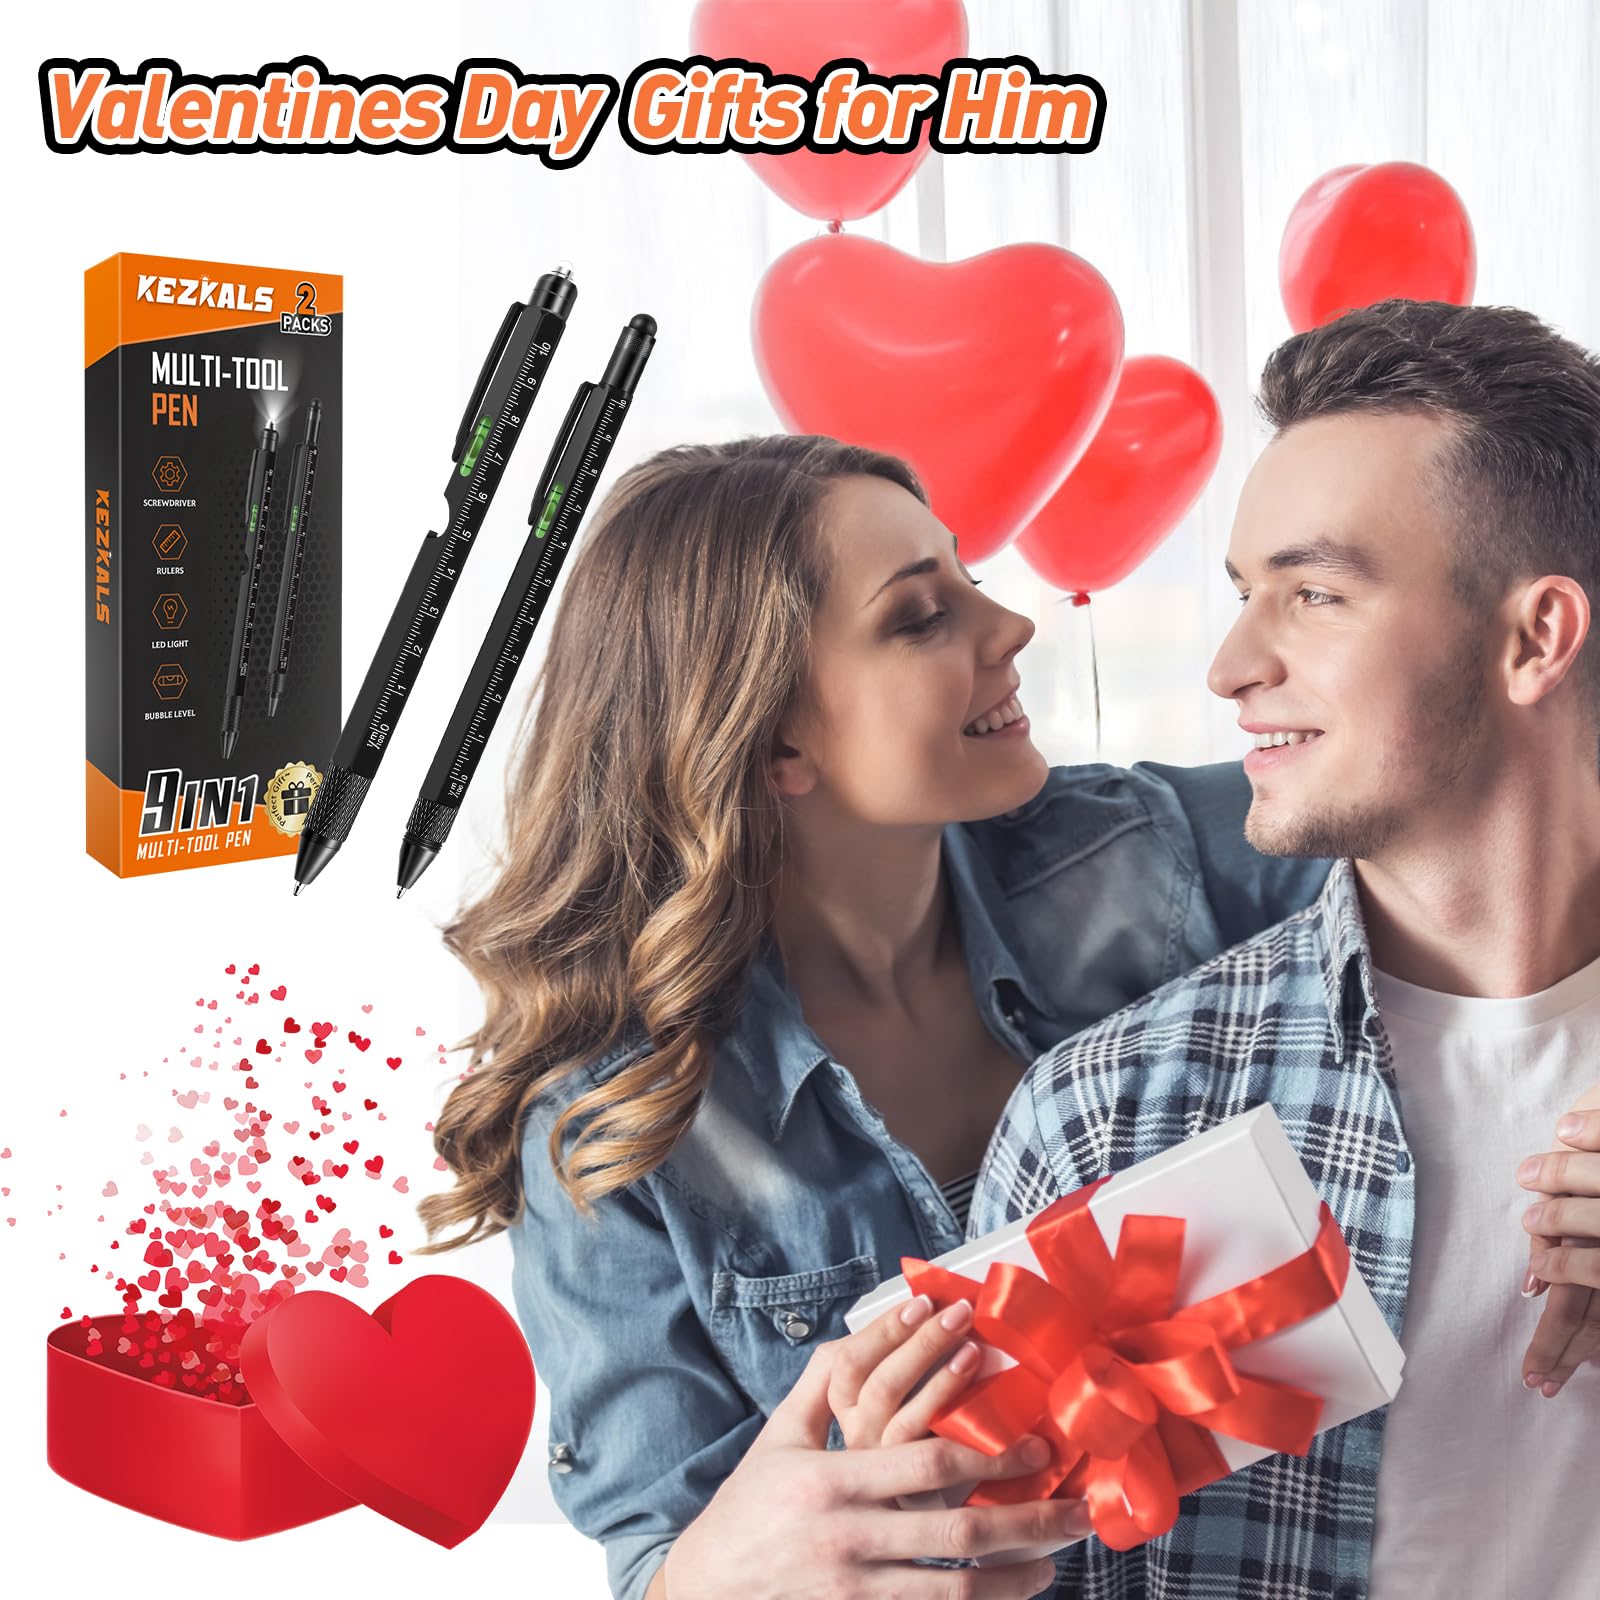 KEZKALS Valentines Day Gifts for Him, Birthday Gifts for Men 9 in 1 Multitool Pen, Men Valentines Day Gifts for Boyfriend/Husband/Dad/Grandpa, Unique Tools Gadgets Gifts for Men Who Have Everything